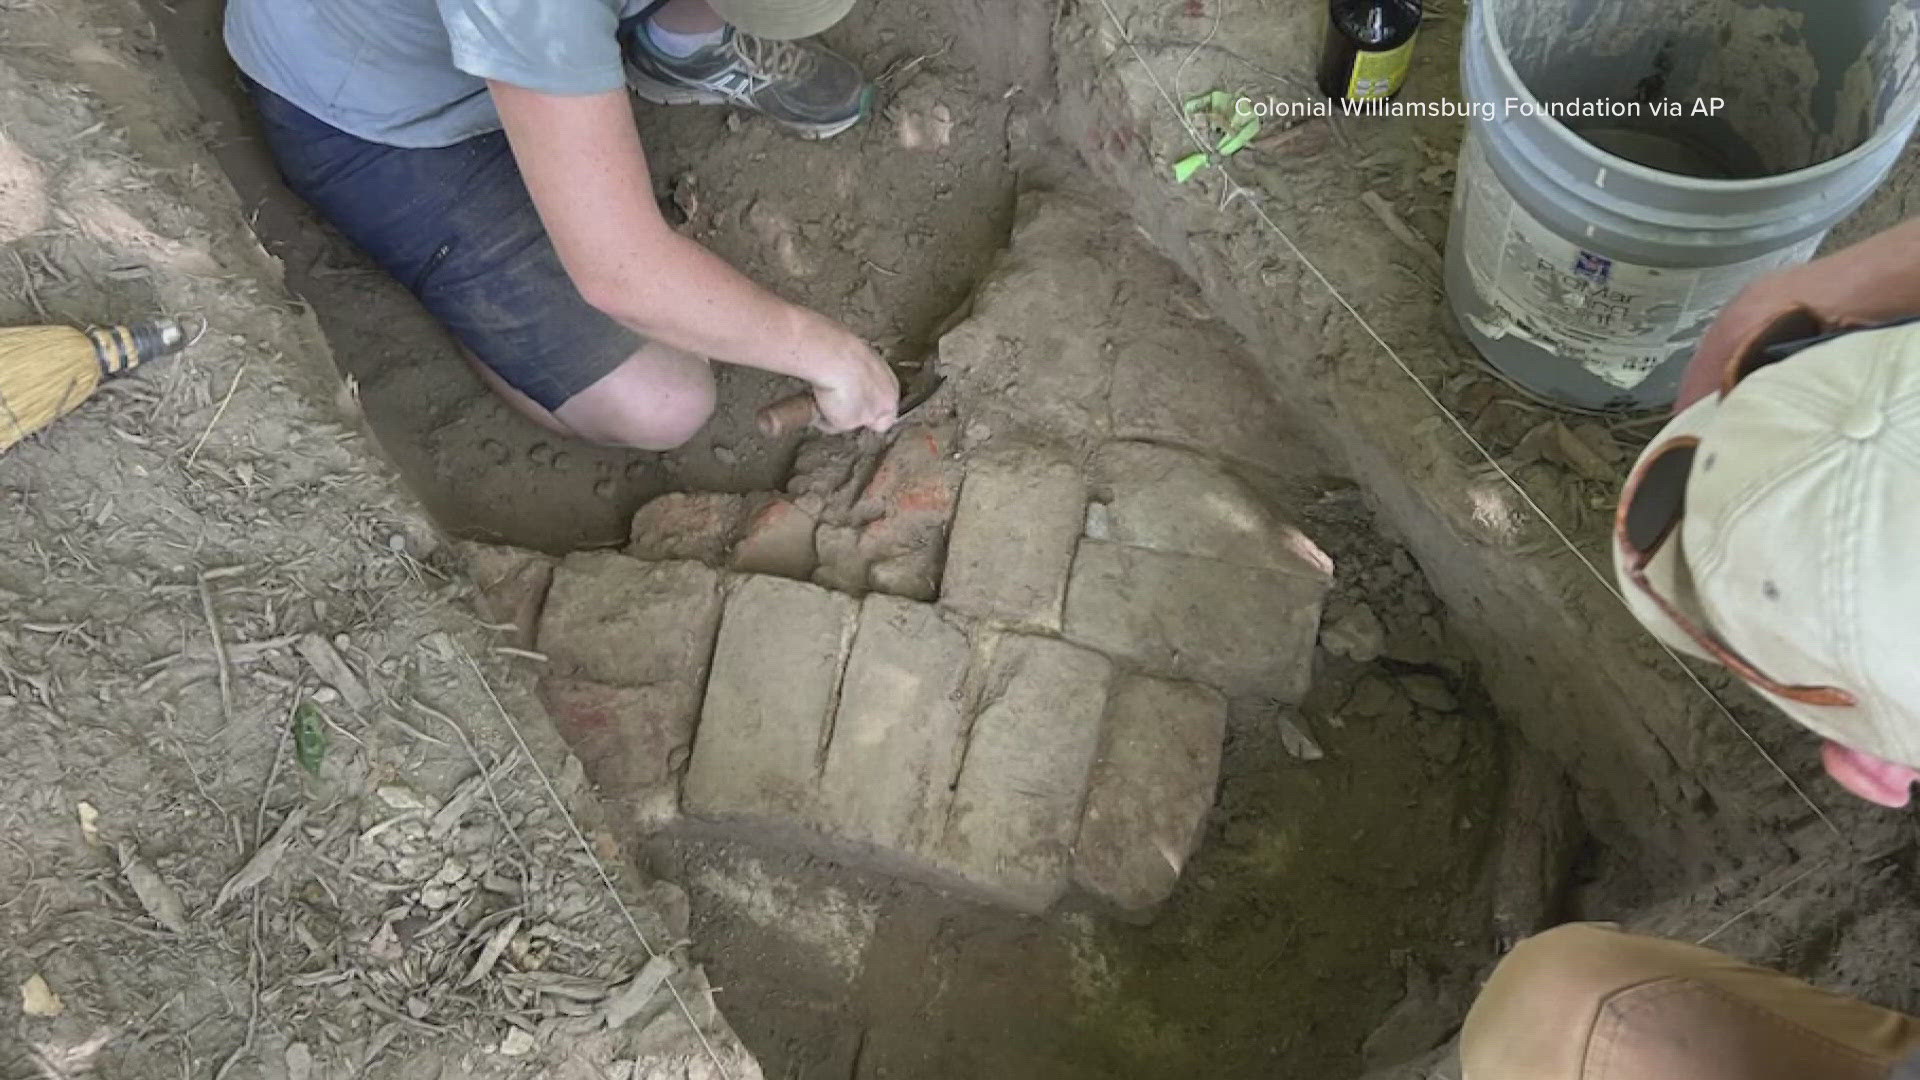 The find out Colonial Williamsburg includes chimney bricks and musket balls.